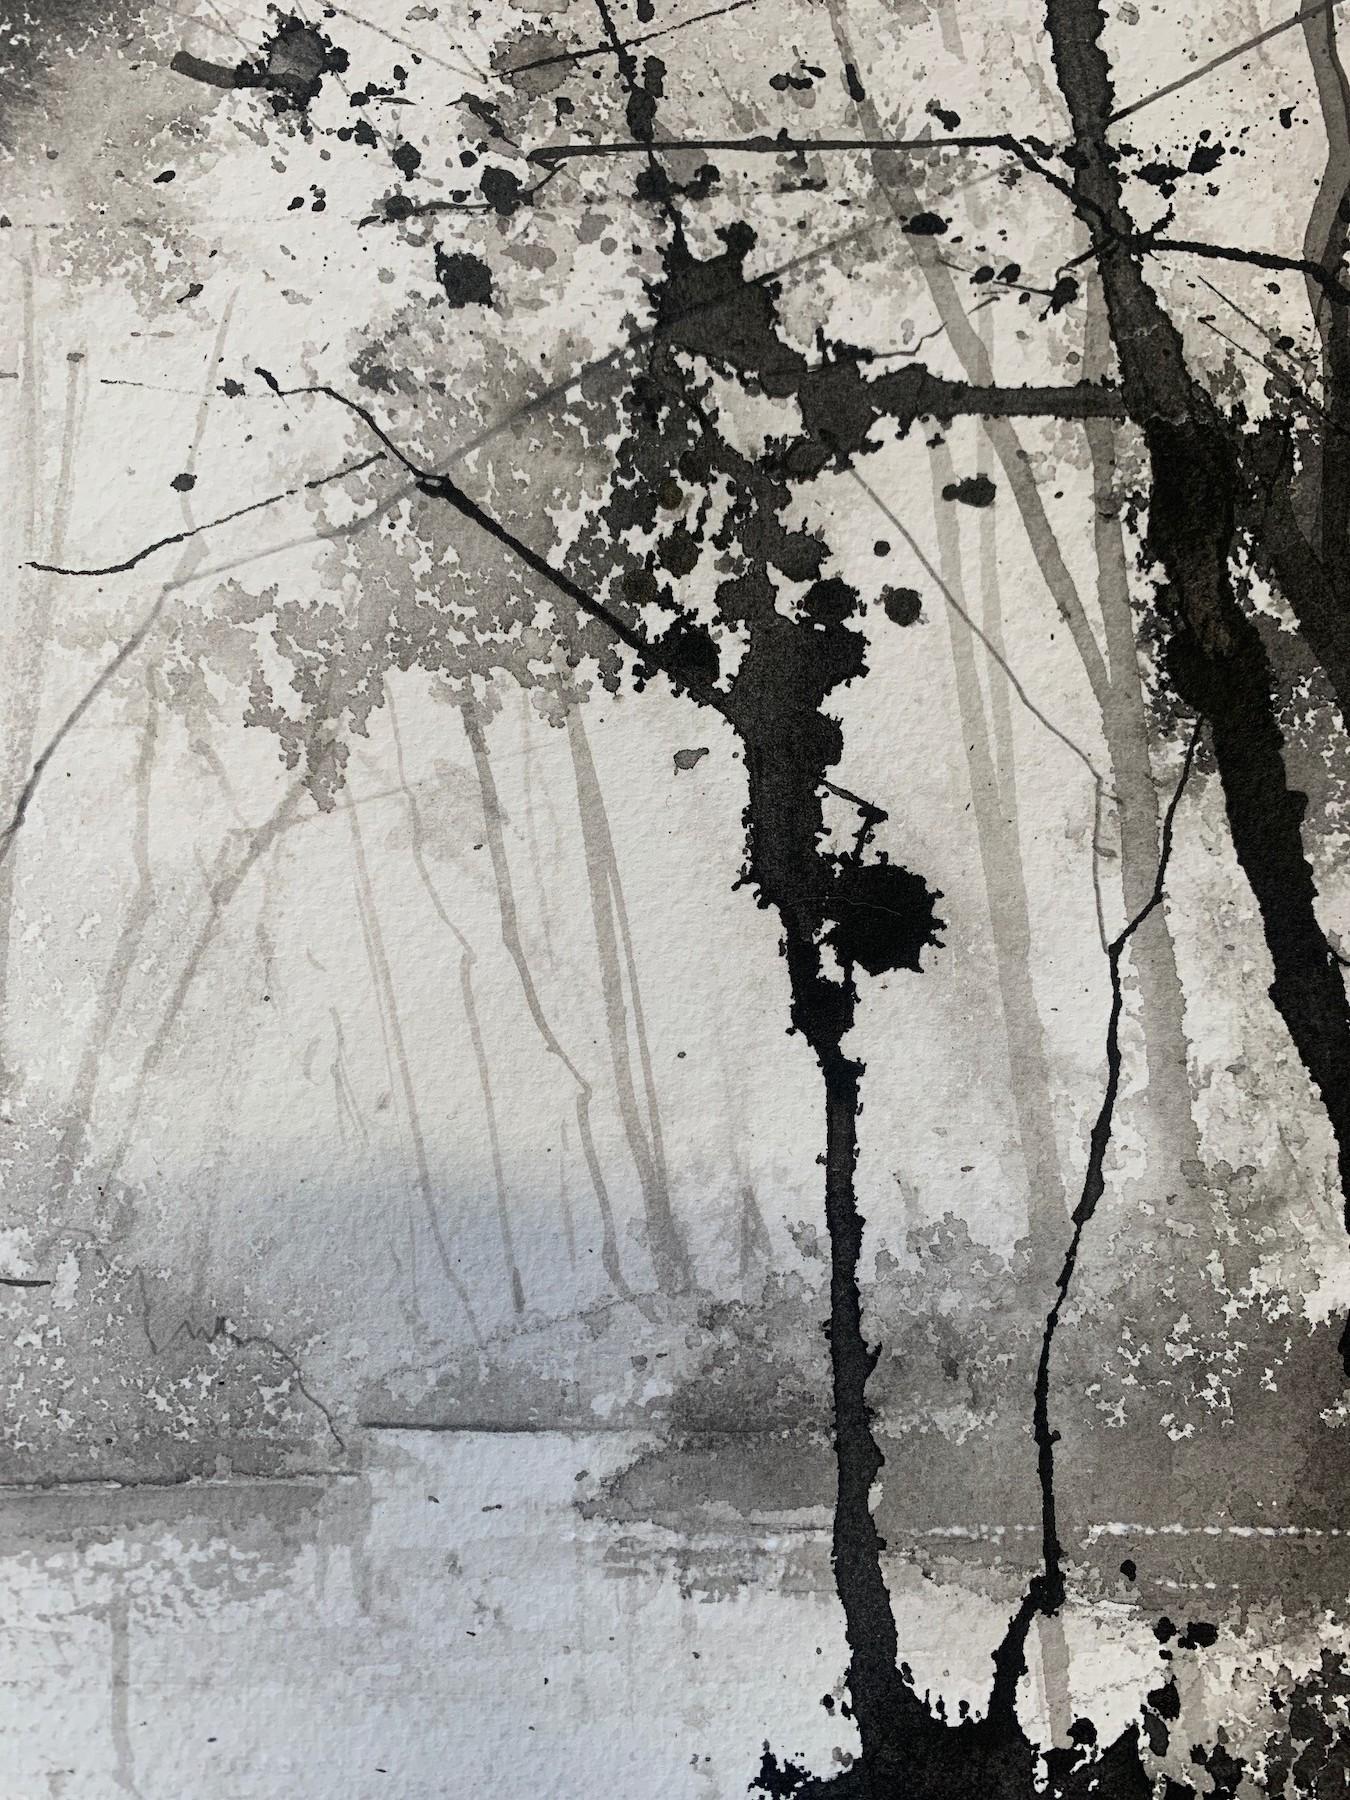 River Dart, James Bonstow, Original painting, Tree art, Monochrome art - Gray Abstract Drawing by James Bonstow 